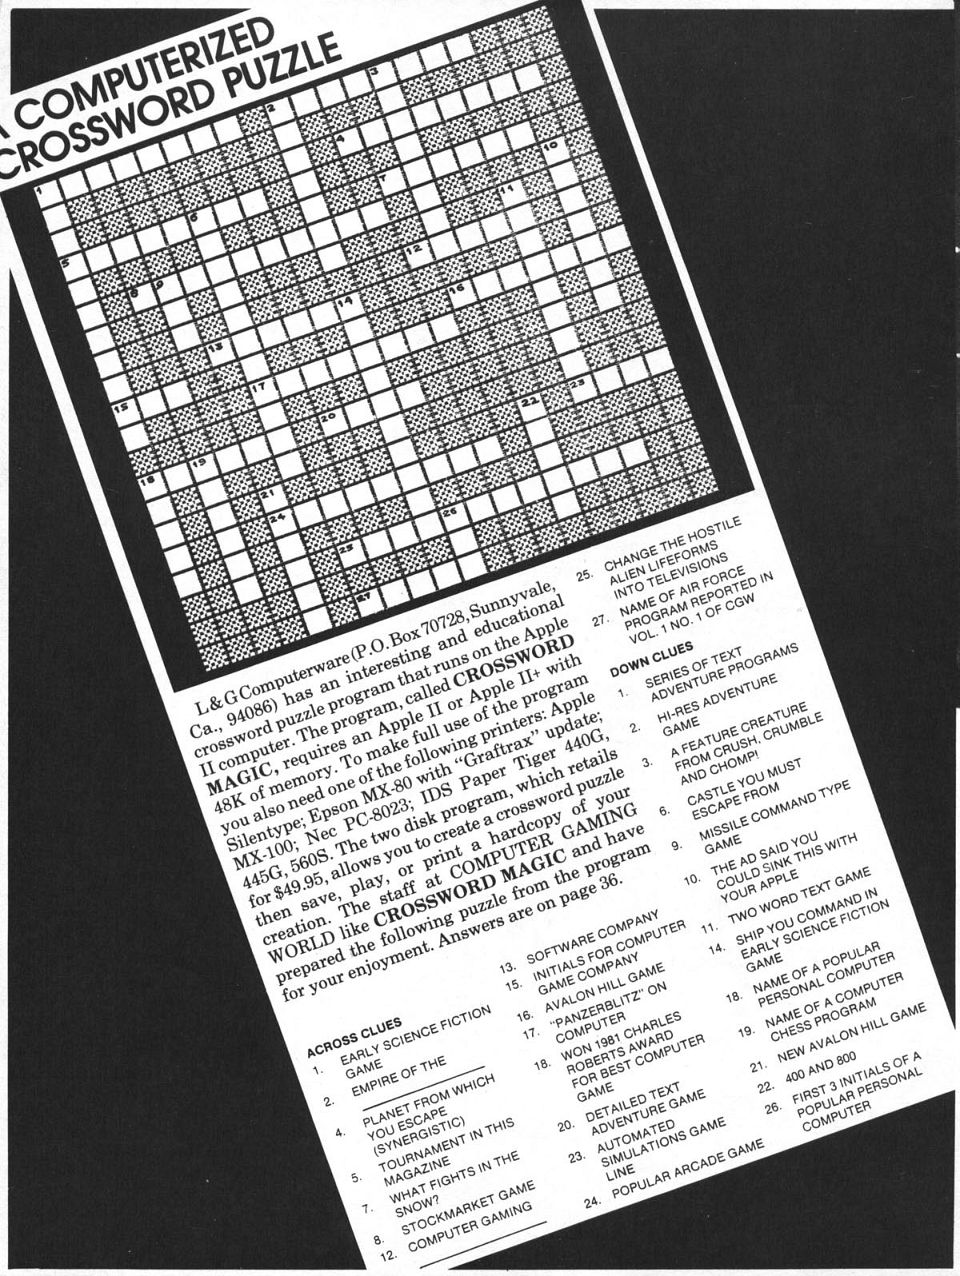 A Computerized Crossword Puzzle